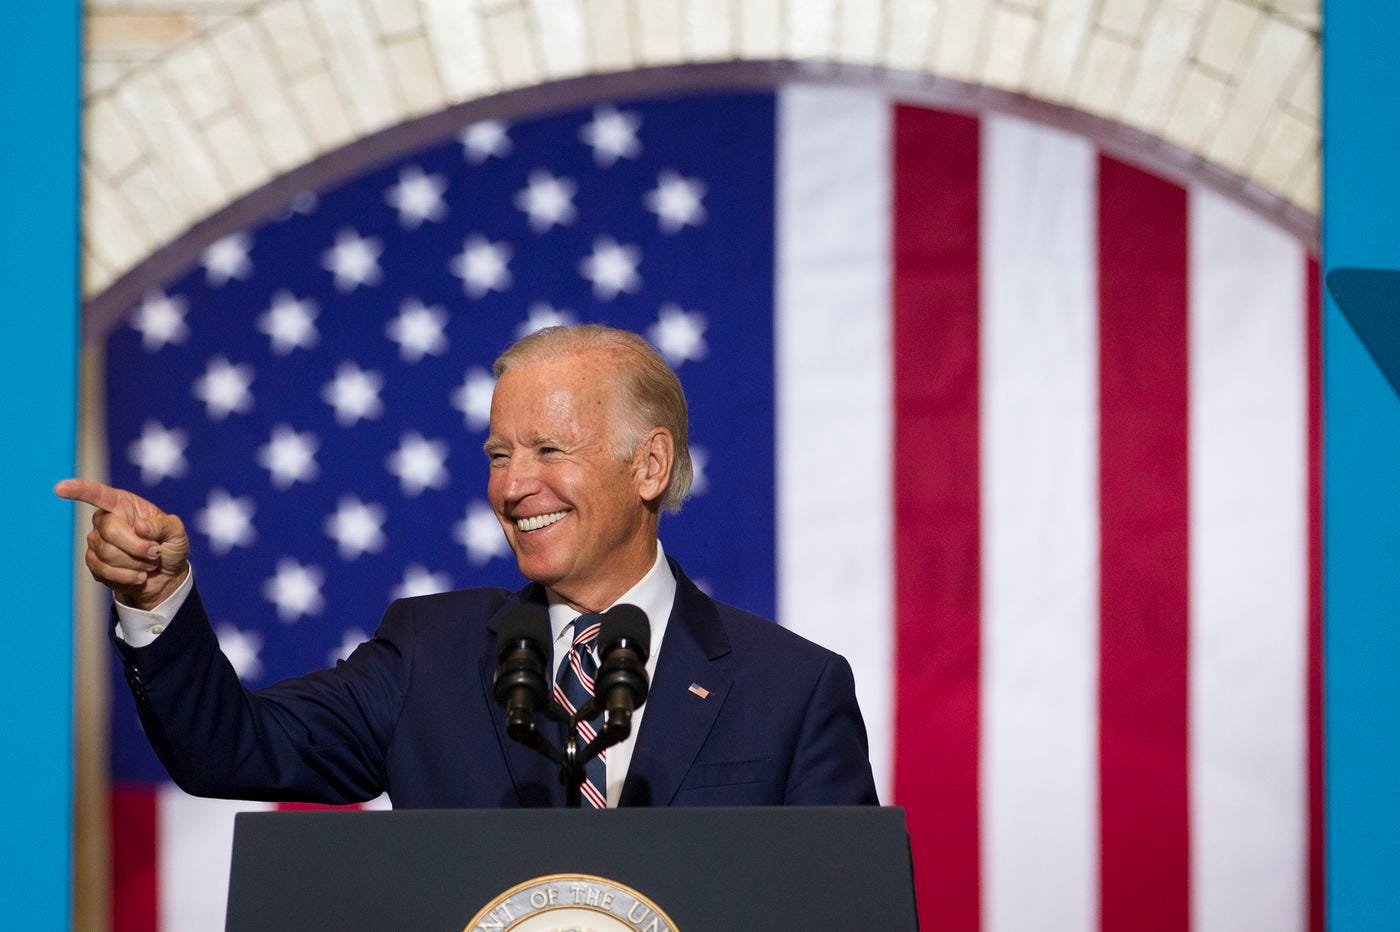 This isn't Joe Biden's first run at president. Here's how he launched his  past campaigns.